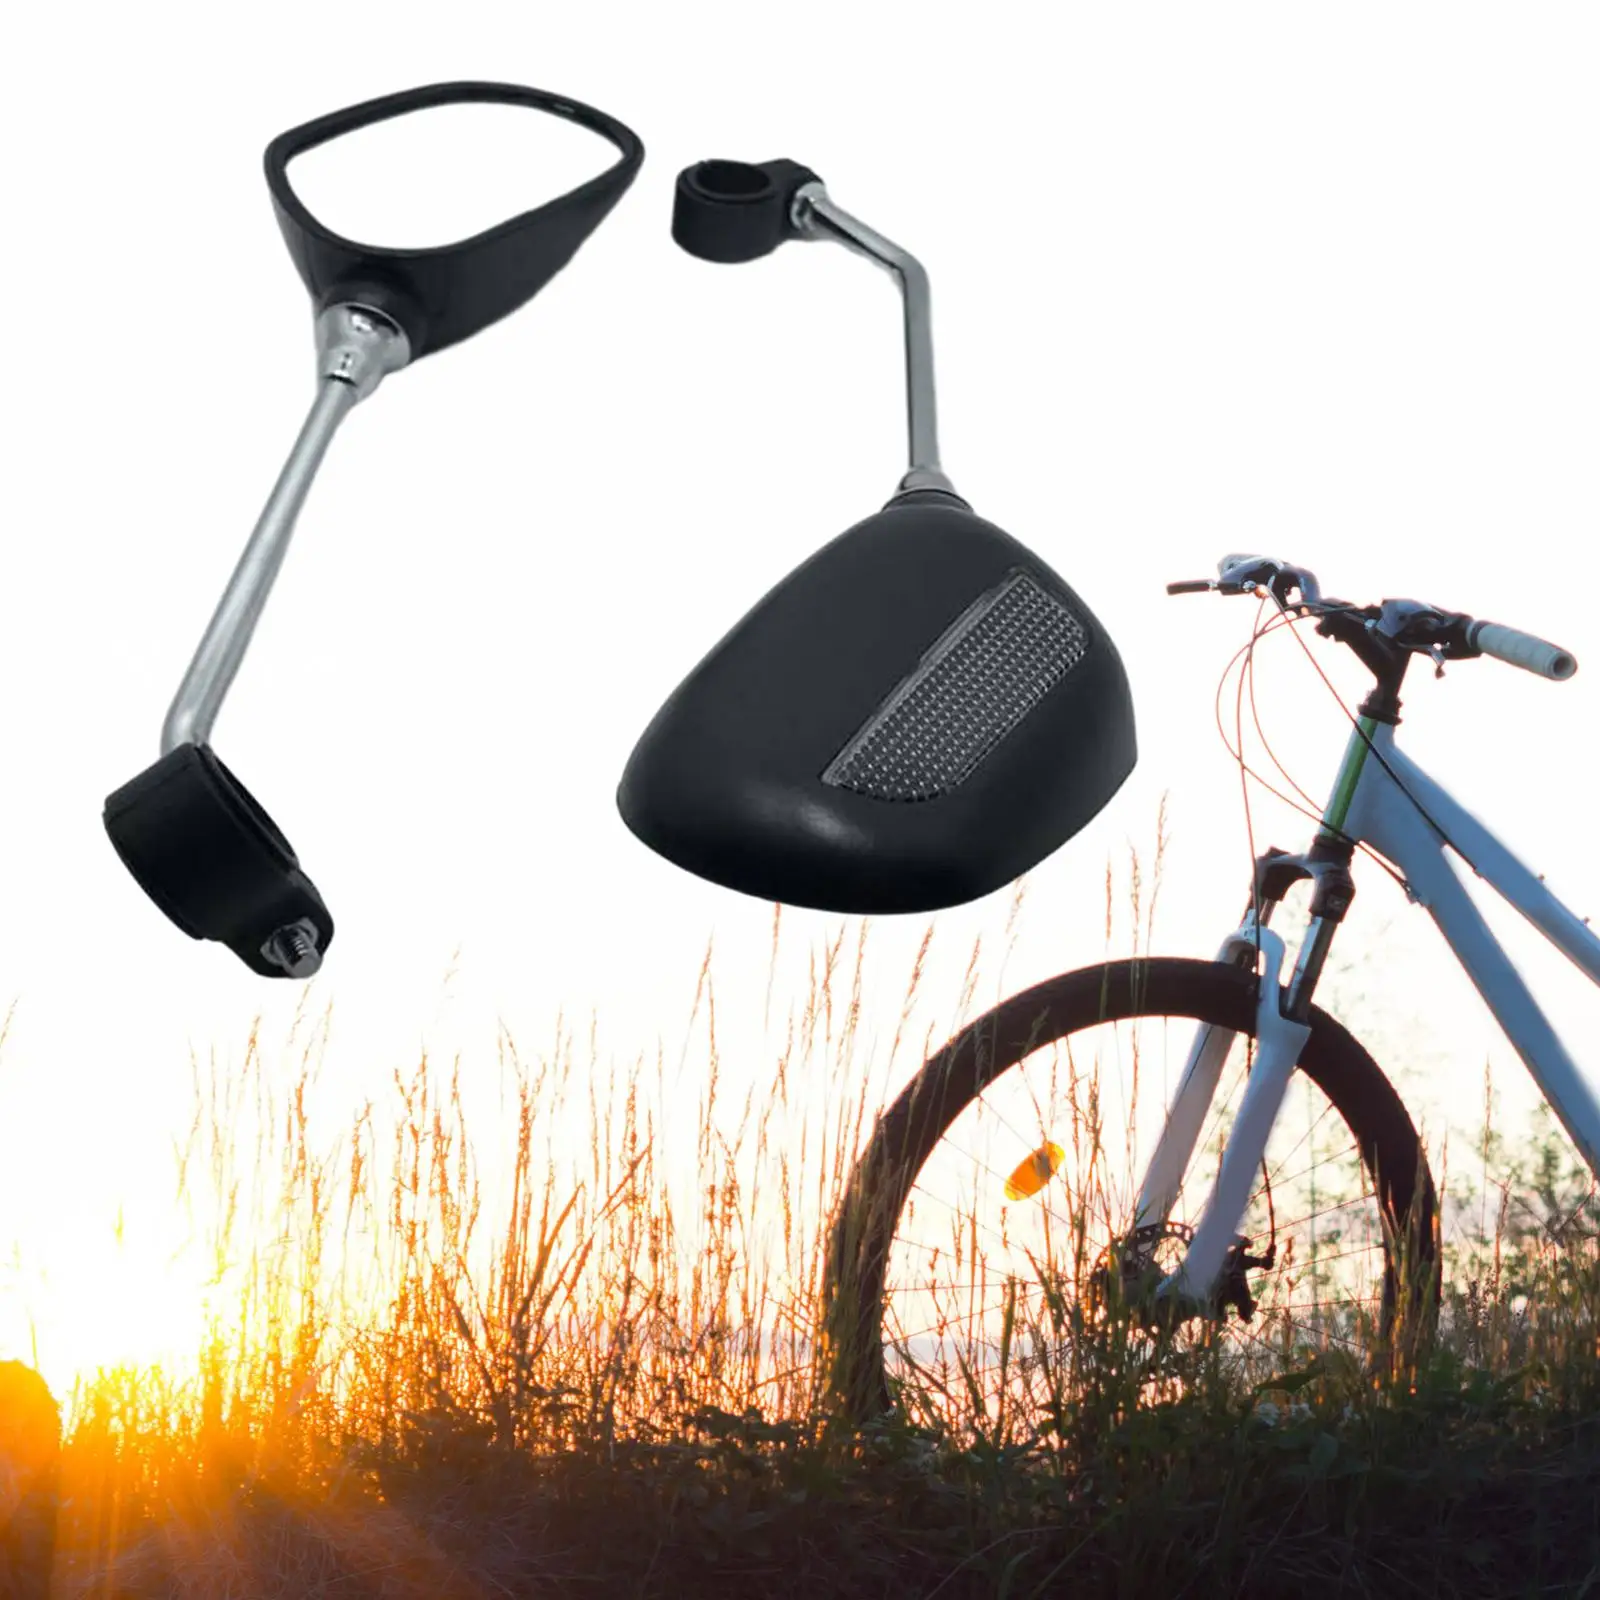 Bike Mirror Rotatable Left and Right Bike Accessories for Handlebars for Mountain Road Bike Electric Bicycle Motorcycle Black